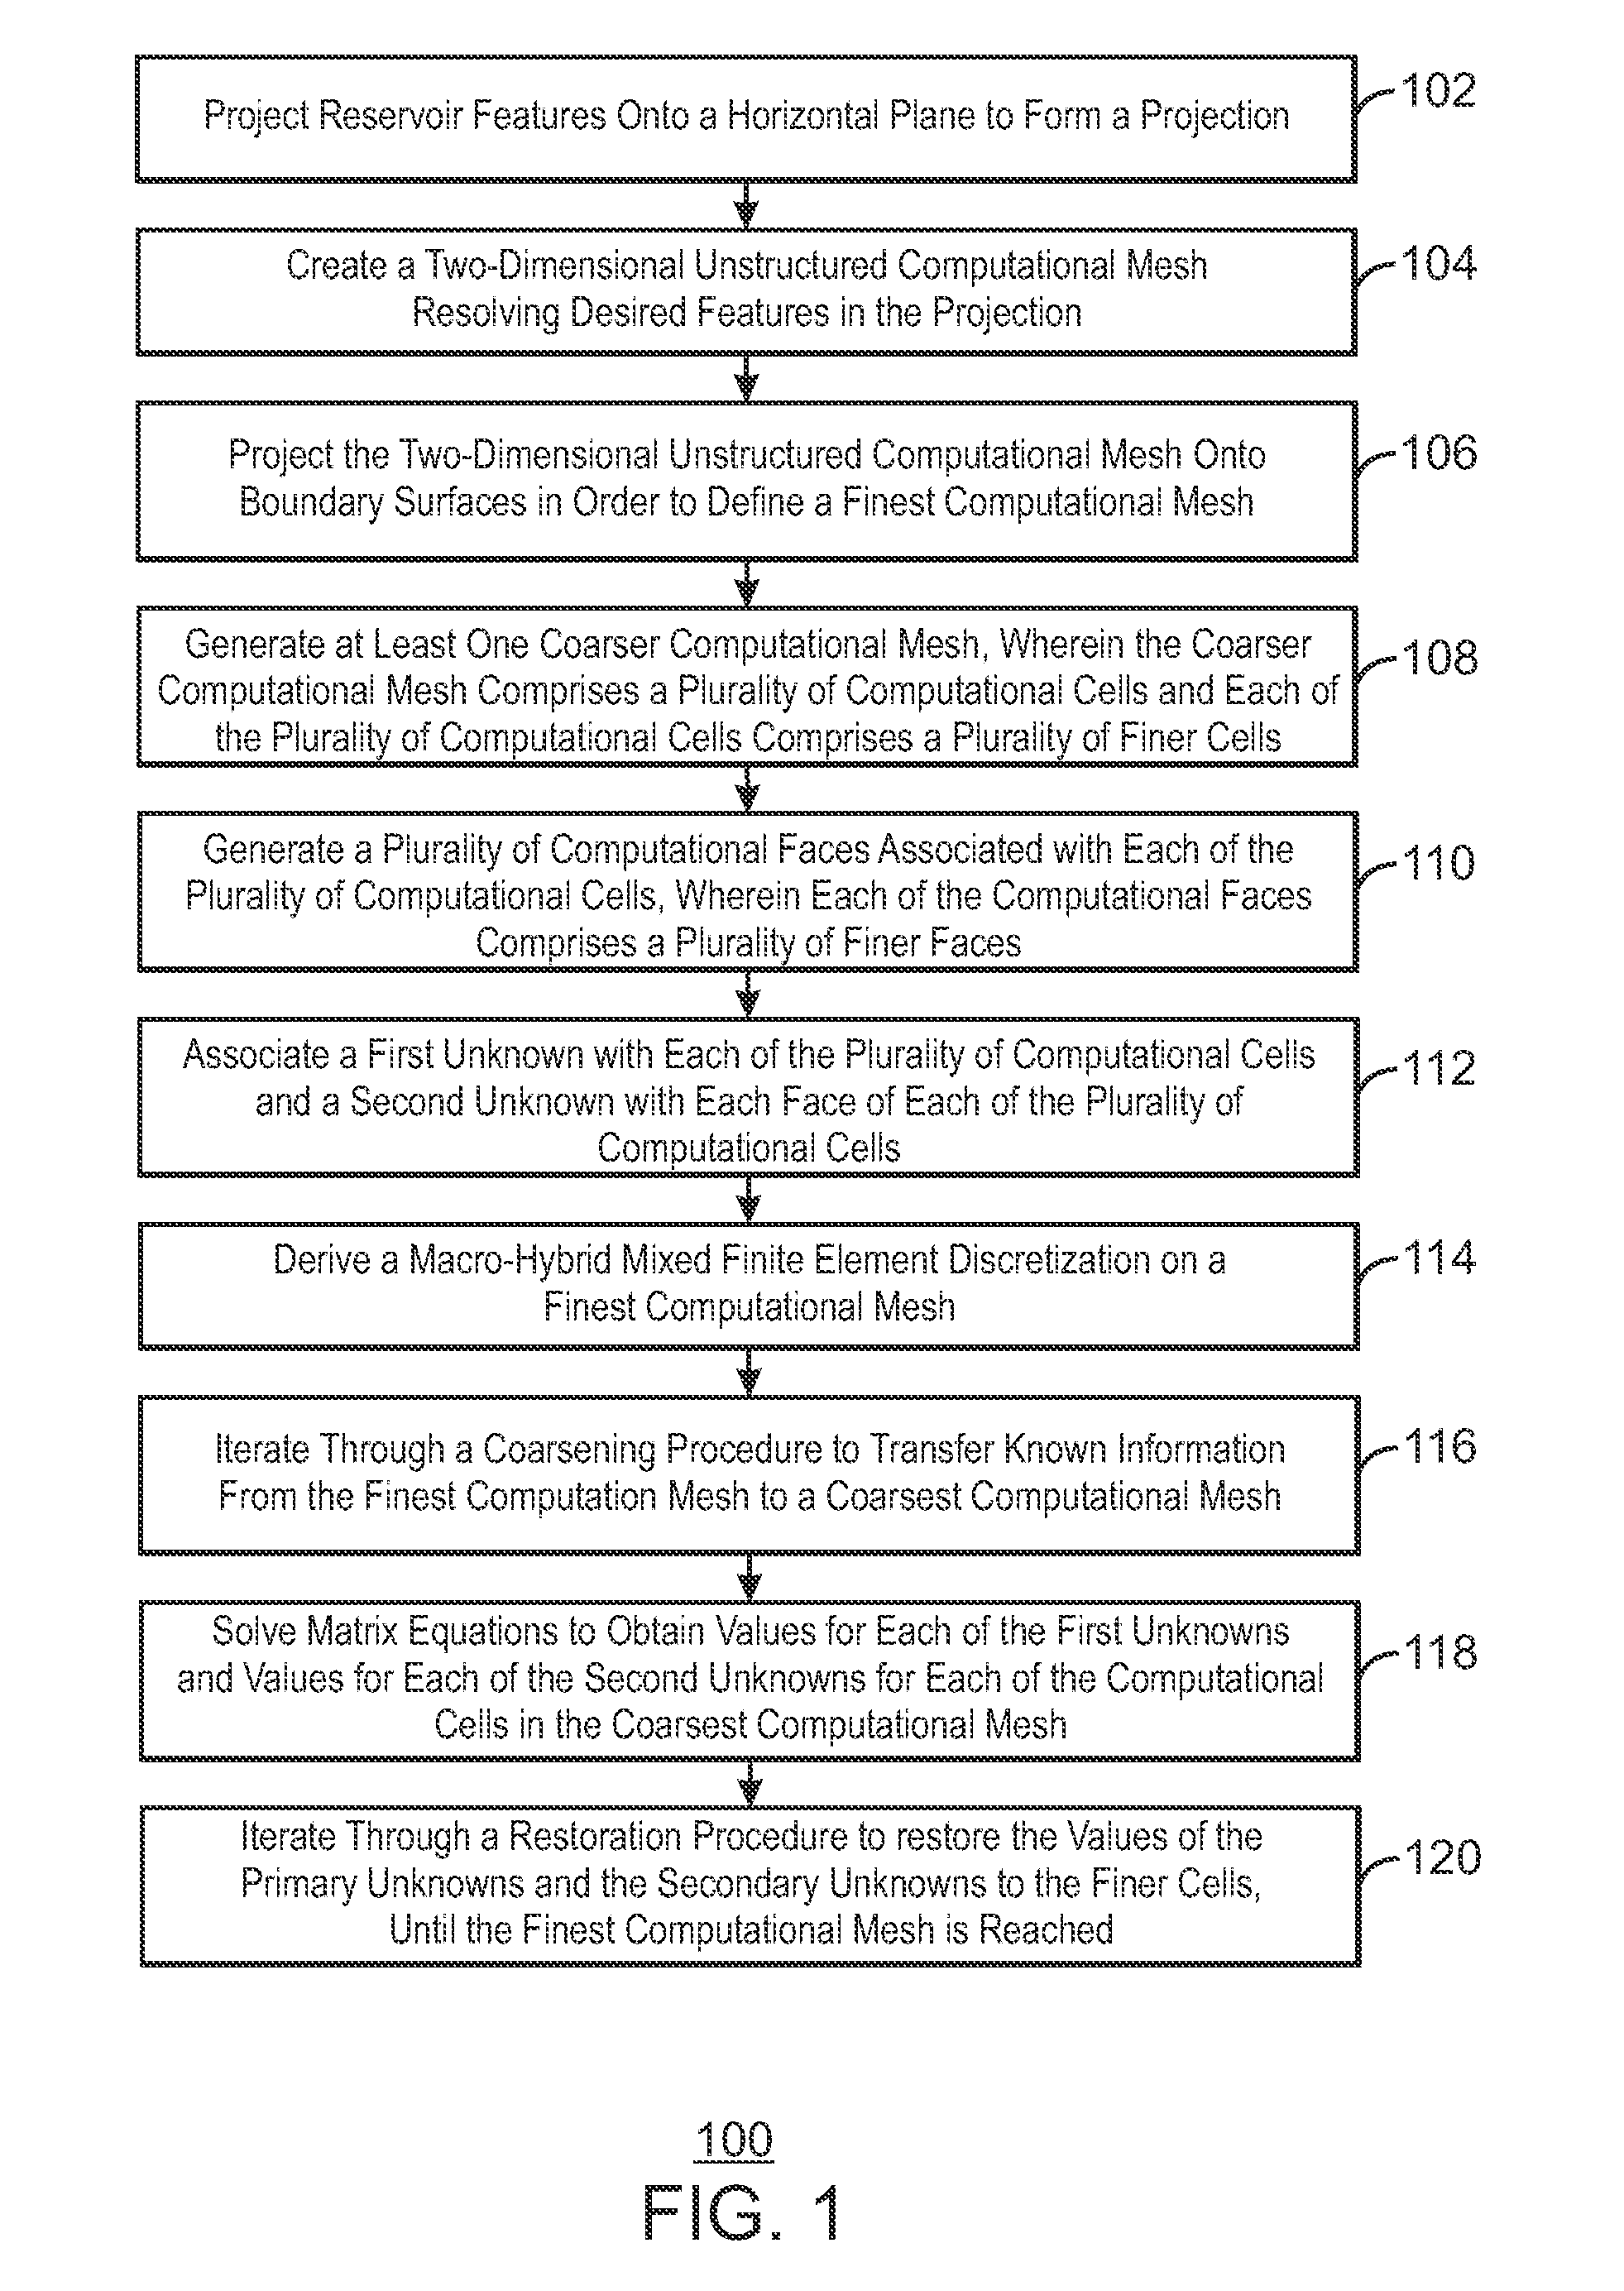 Method and System For Modeling Geologic Properties Using Homogenized Mixed Finite Elements